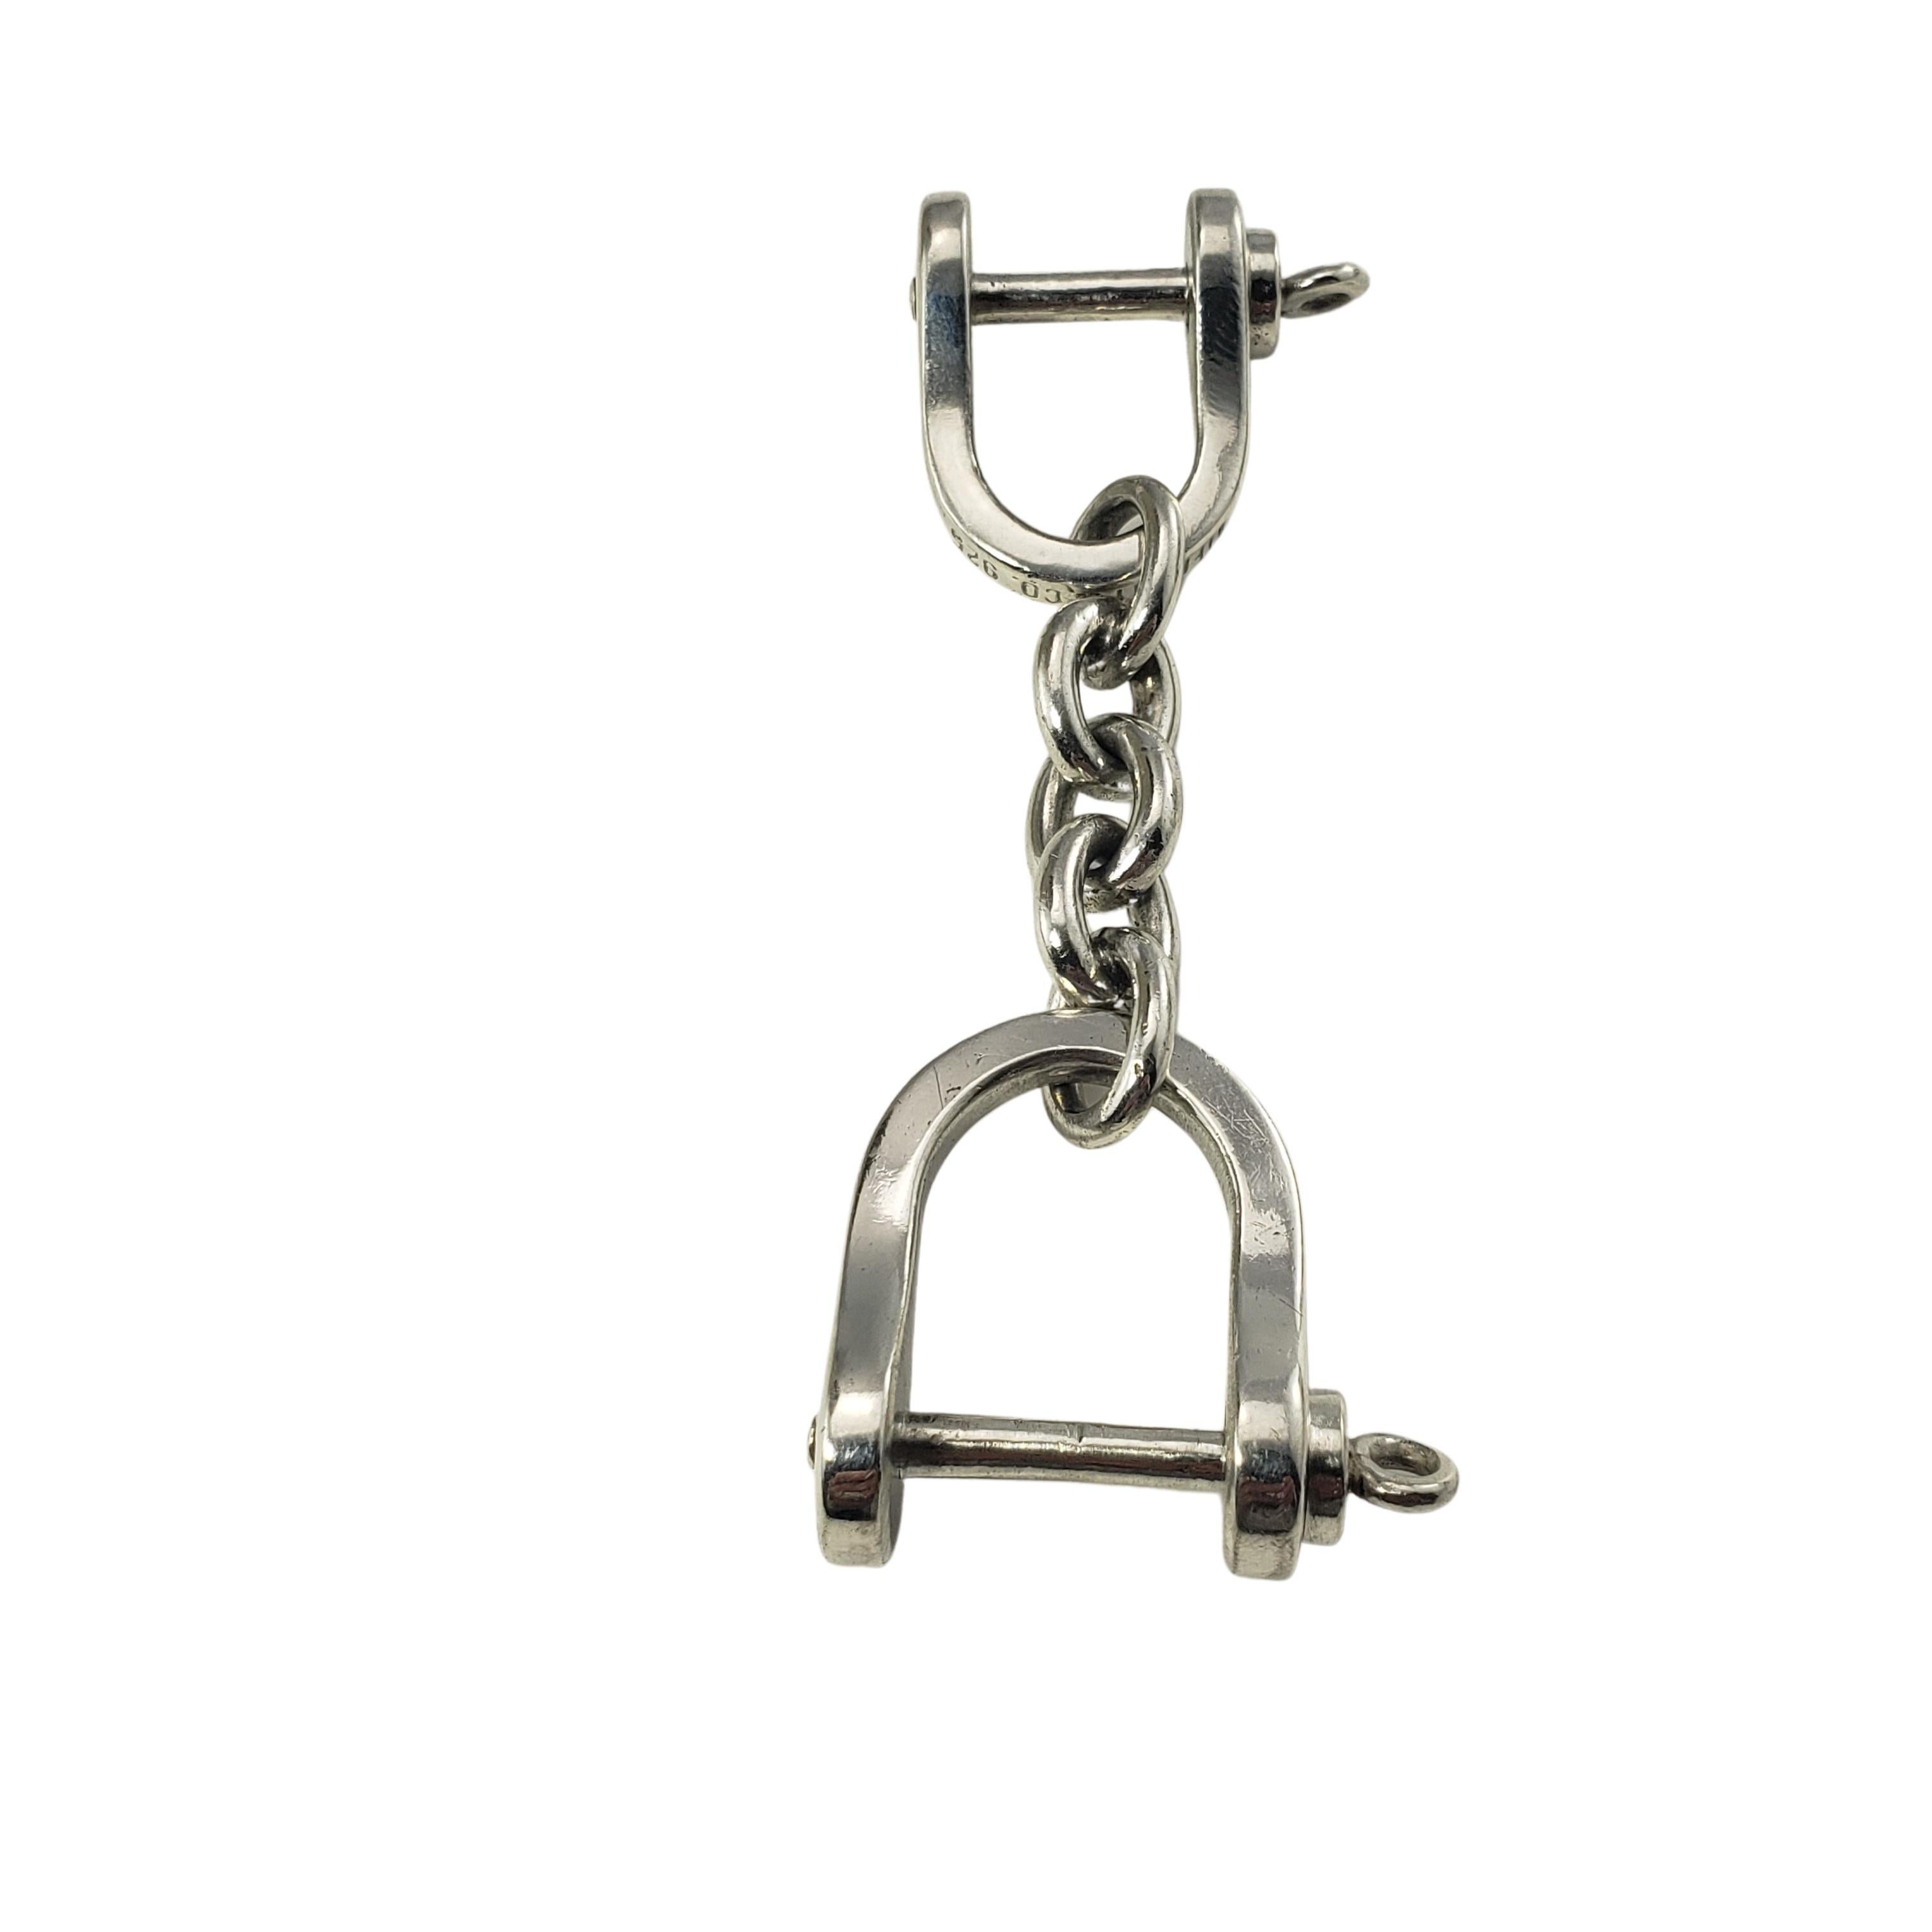 Tiffany & Co. Sterling Silver Valet Shackle Horsebit Keychain-

This elegant horsebit keychain with detachable valet link by Tiffany & Co. is crafted in meticulously detailed sterling silver.  

Size:  3.25 inches

Weight:    21.3 dwt. /   33.2